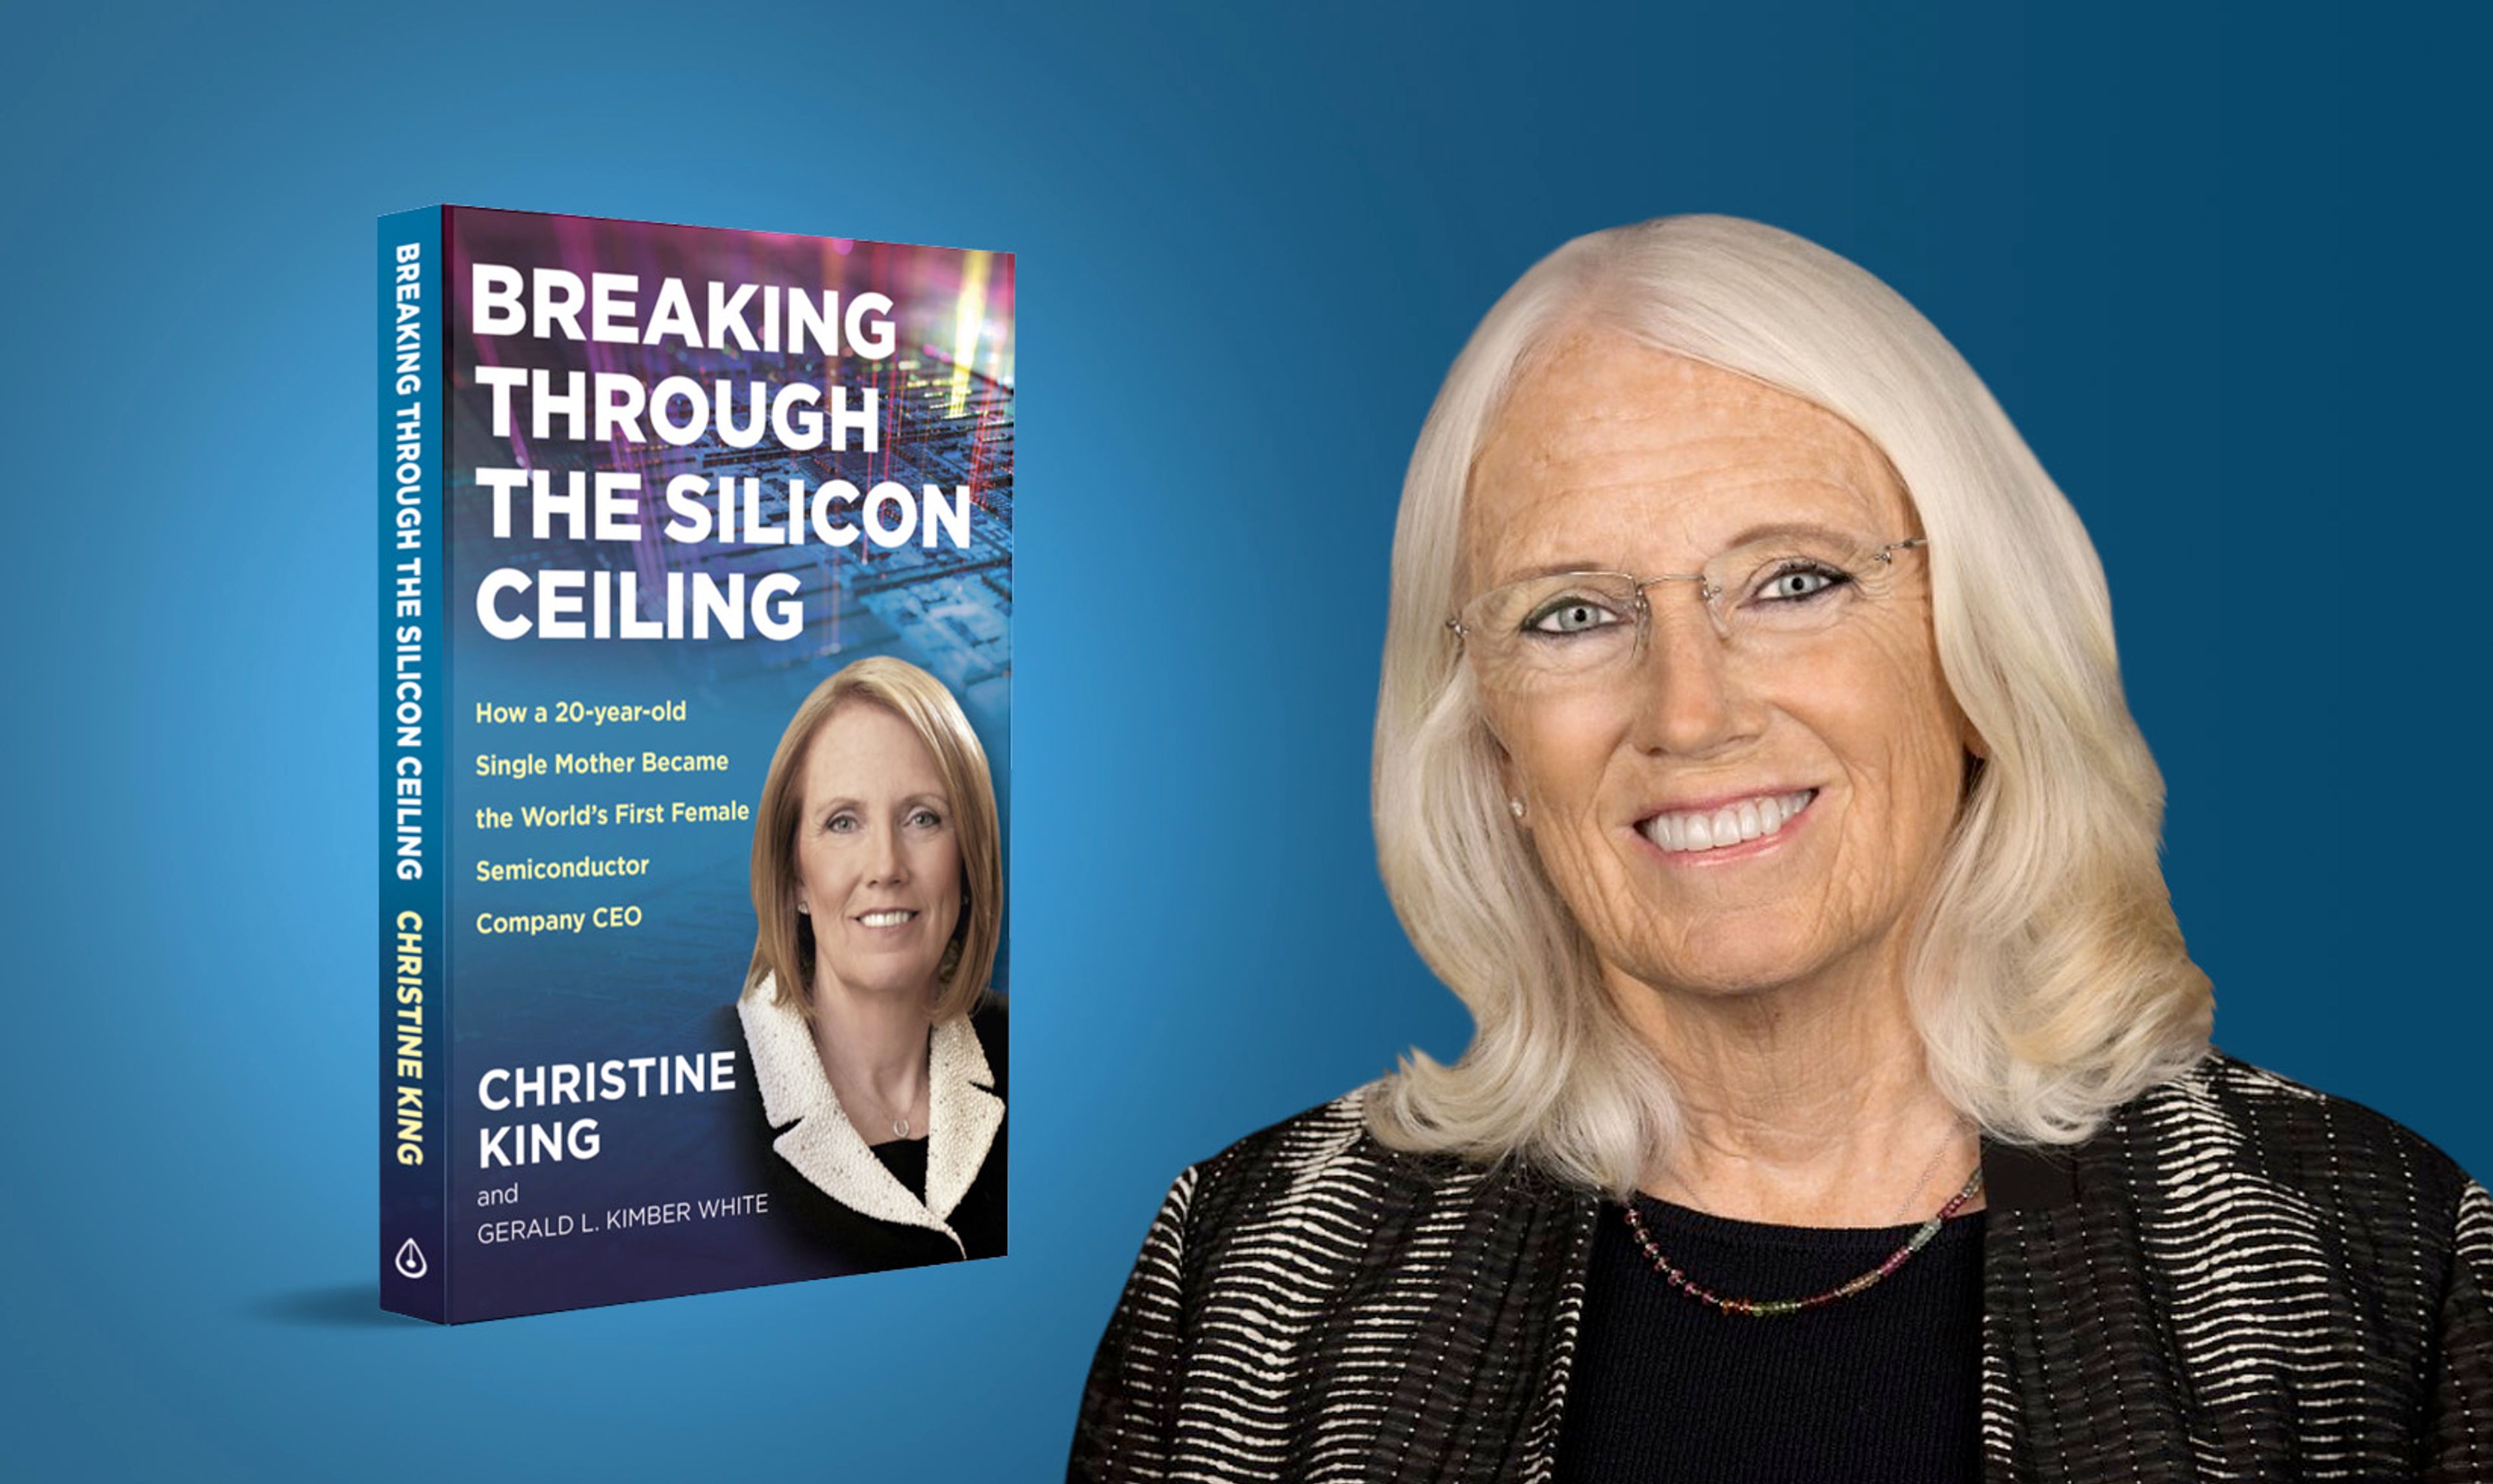 Christine King headshot and image of her forthcoming book, "Breaking Through the Silicon Ceiling"